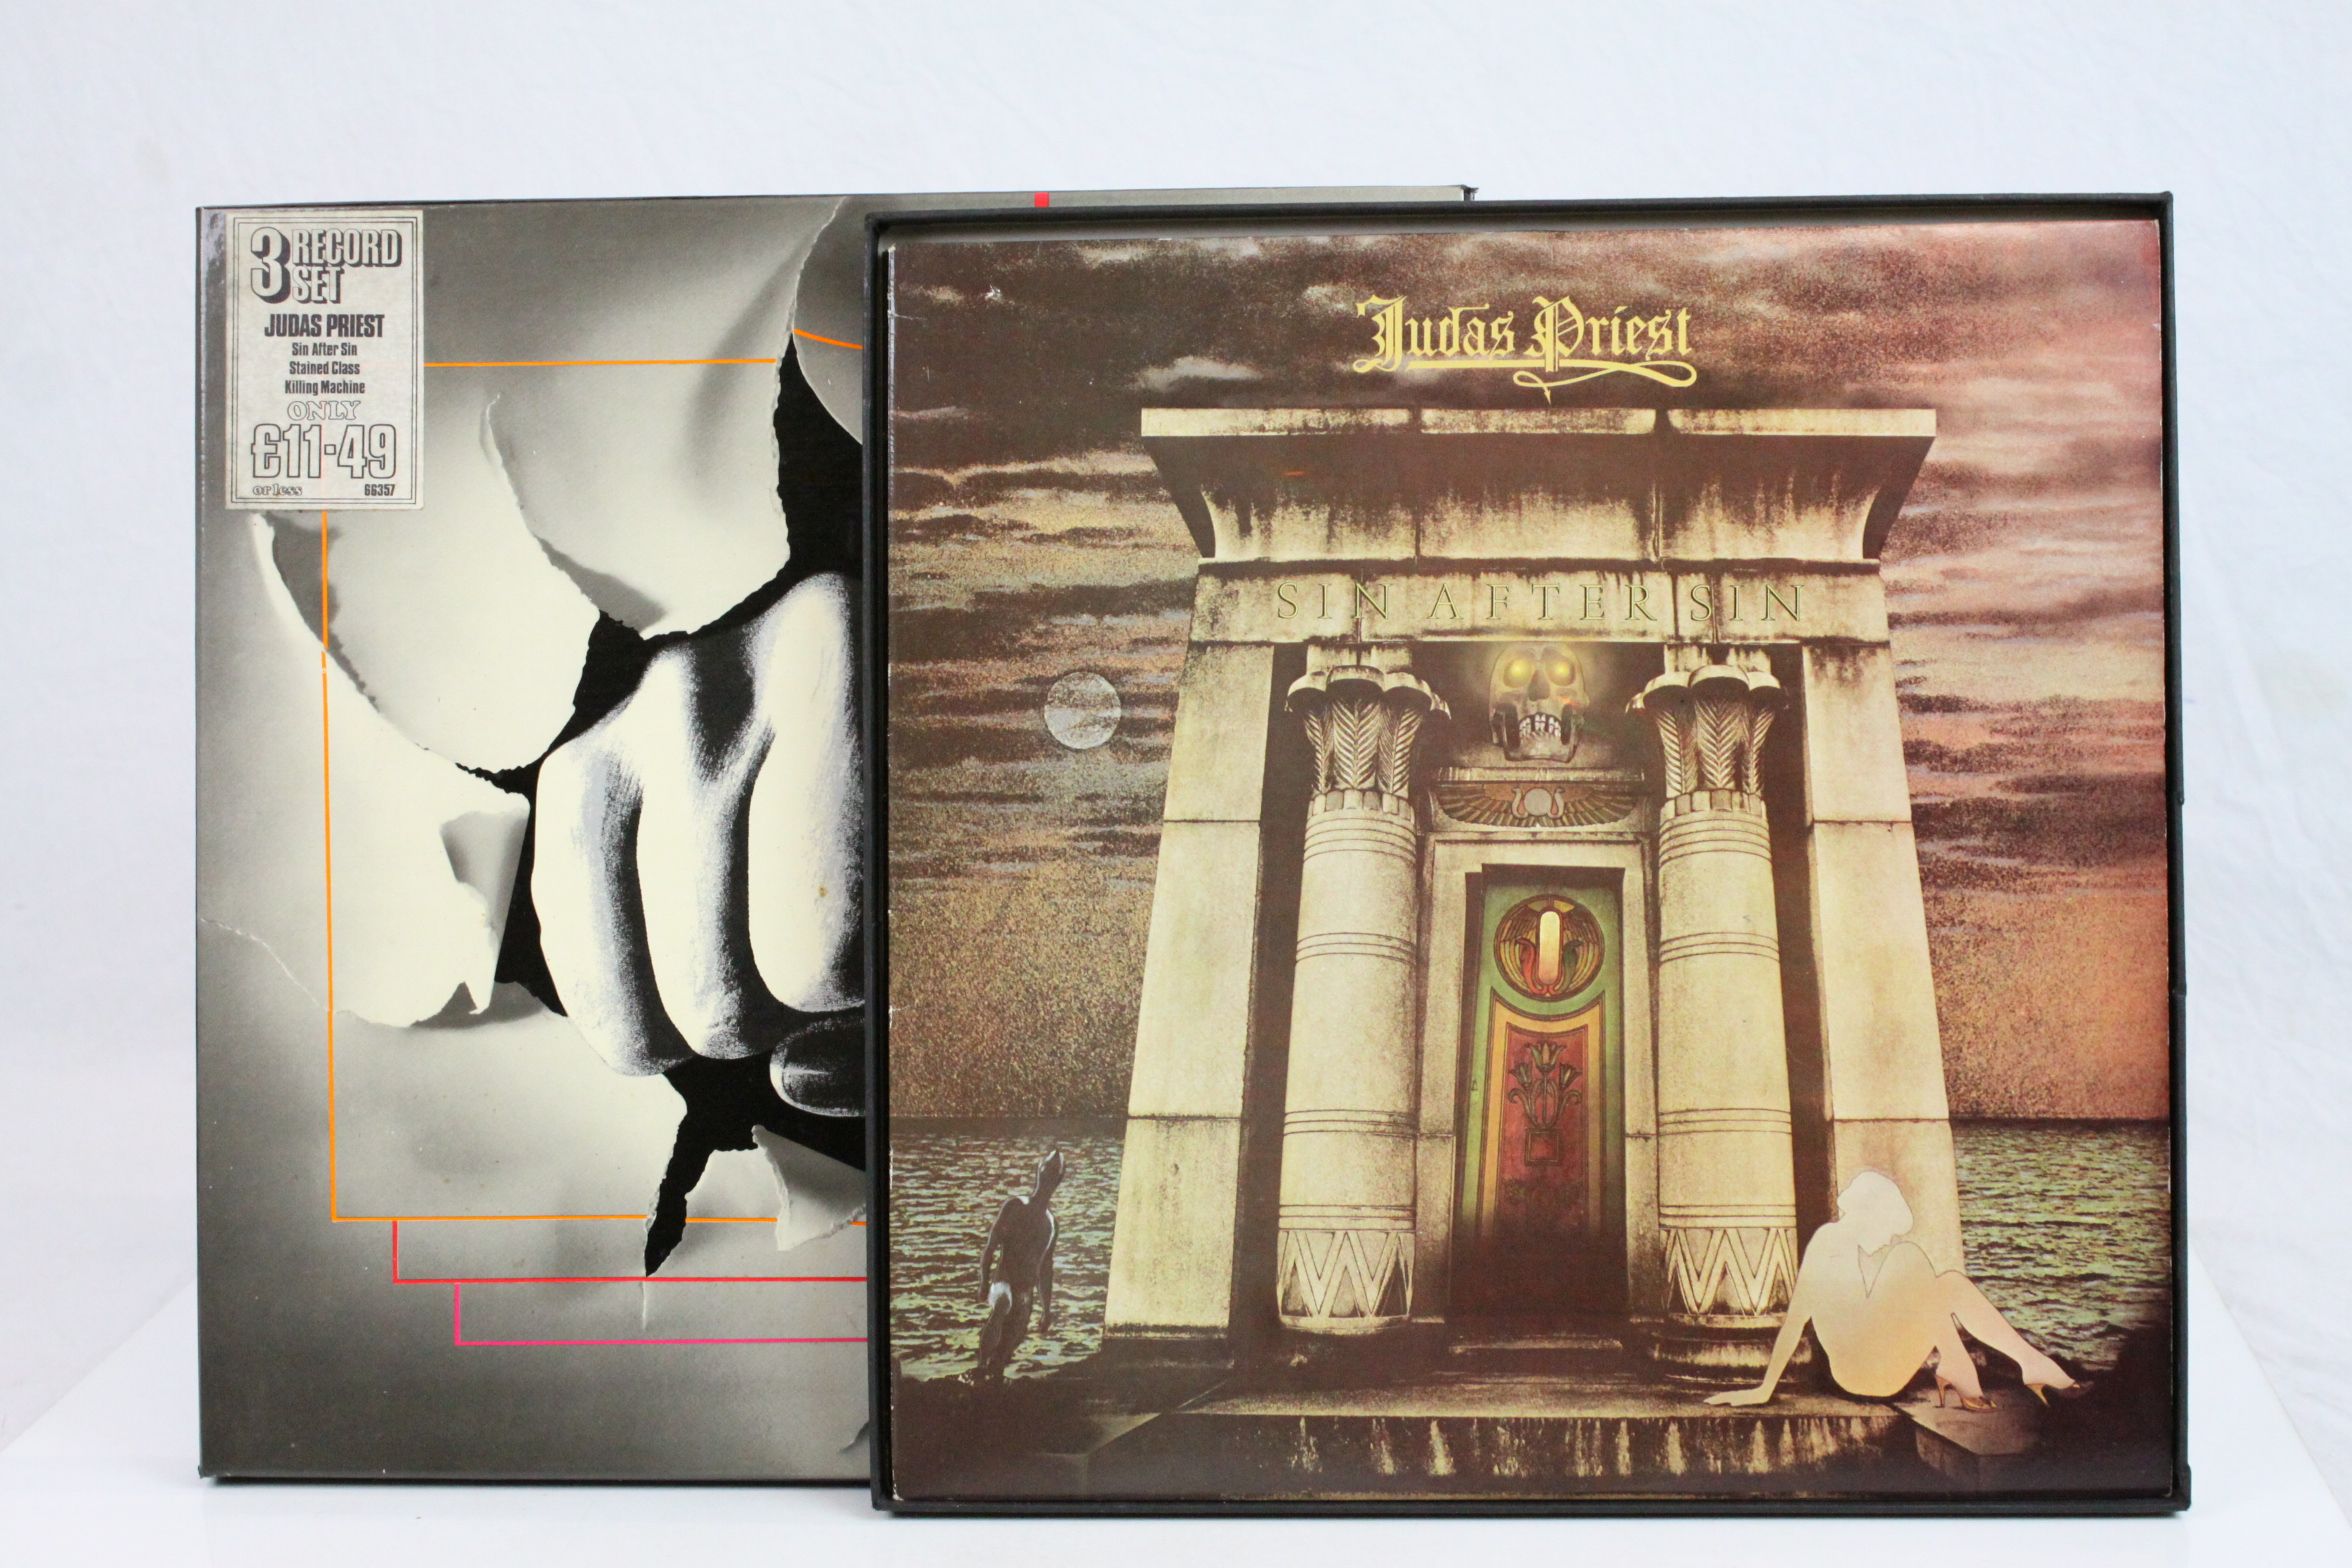 Vinyl - Judas Priest 3 LP Box Set on CBS 66357 featuring Sin After Sin, Stained Glass and Killing - Image 2 of 8